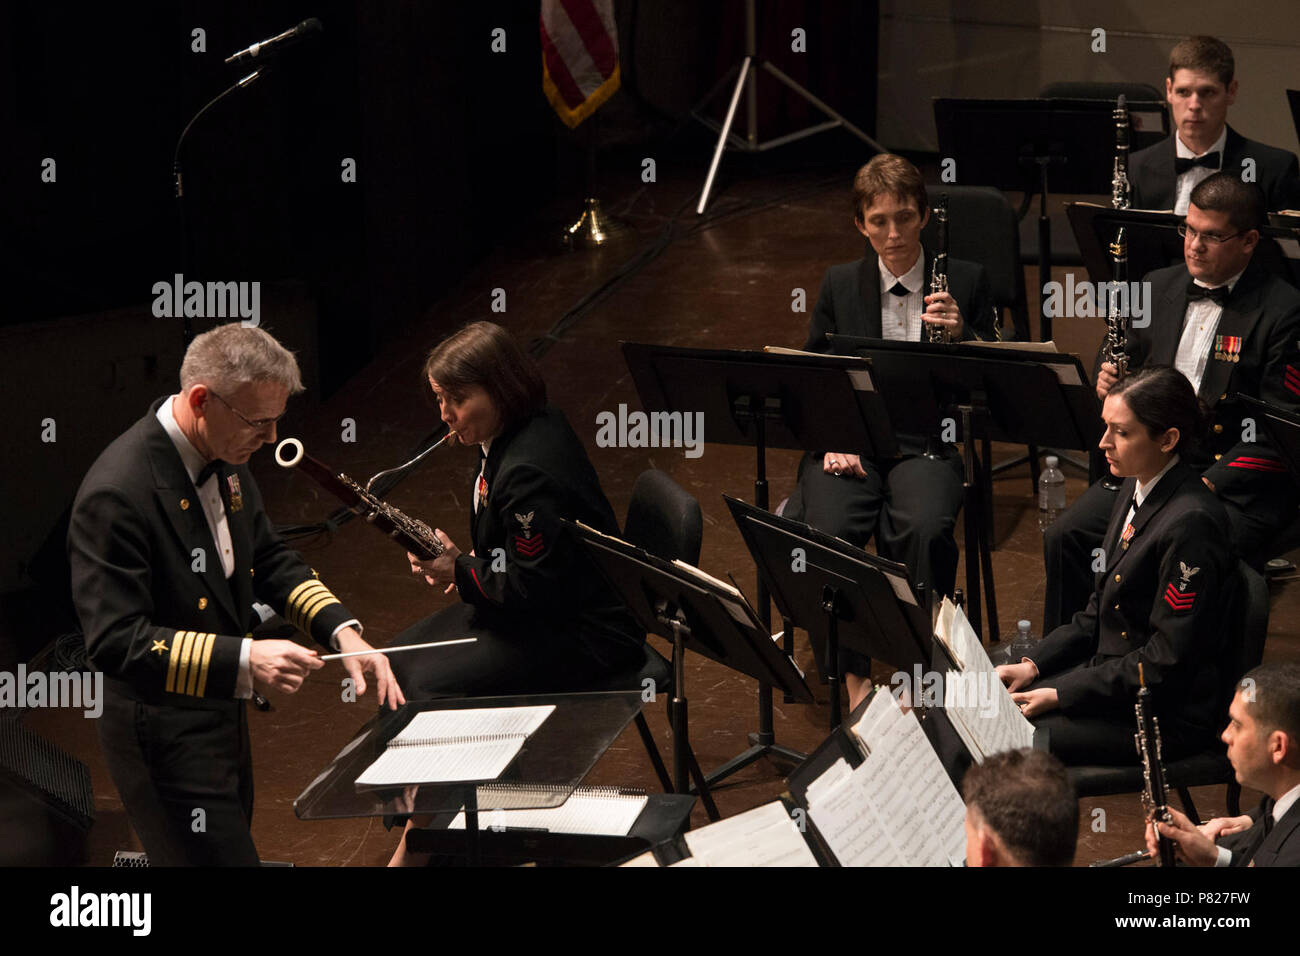 AMHERST, MASS (Mar. 6, 2016) Musician First Class Renee DeBoer performs a bassoon solo with the United States Navy Band at the University of Massachussetts Fine Arts Center in Amherst, Mass. The U.S. Navy Band is on a 25-day tour of the northeastern United States. Stock Photo